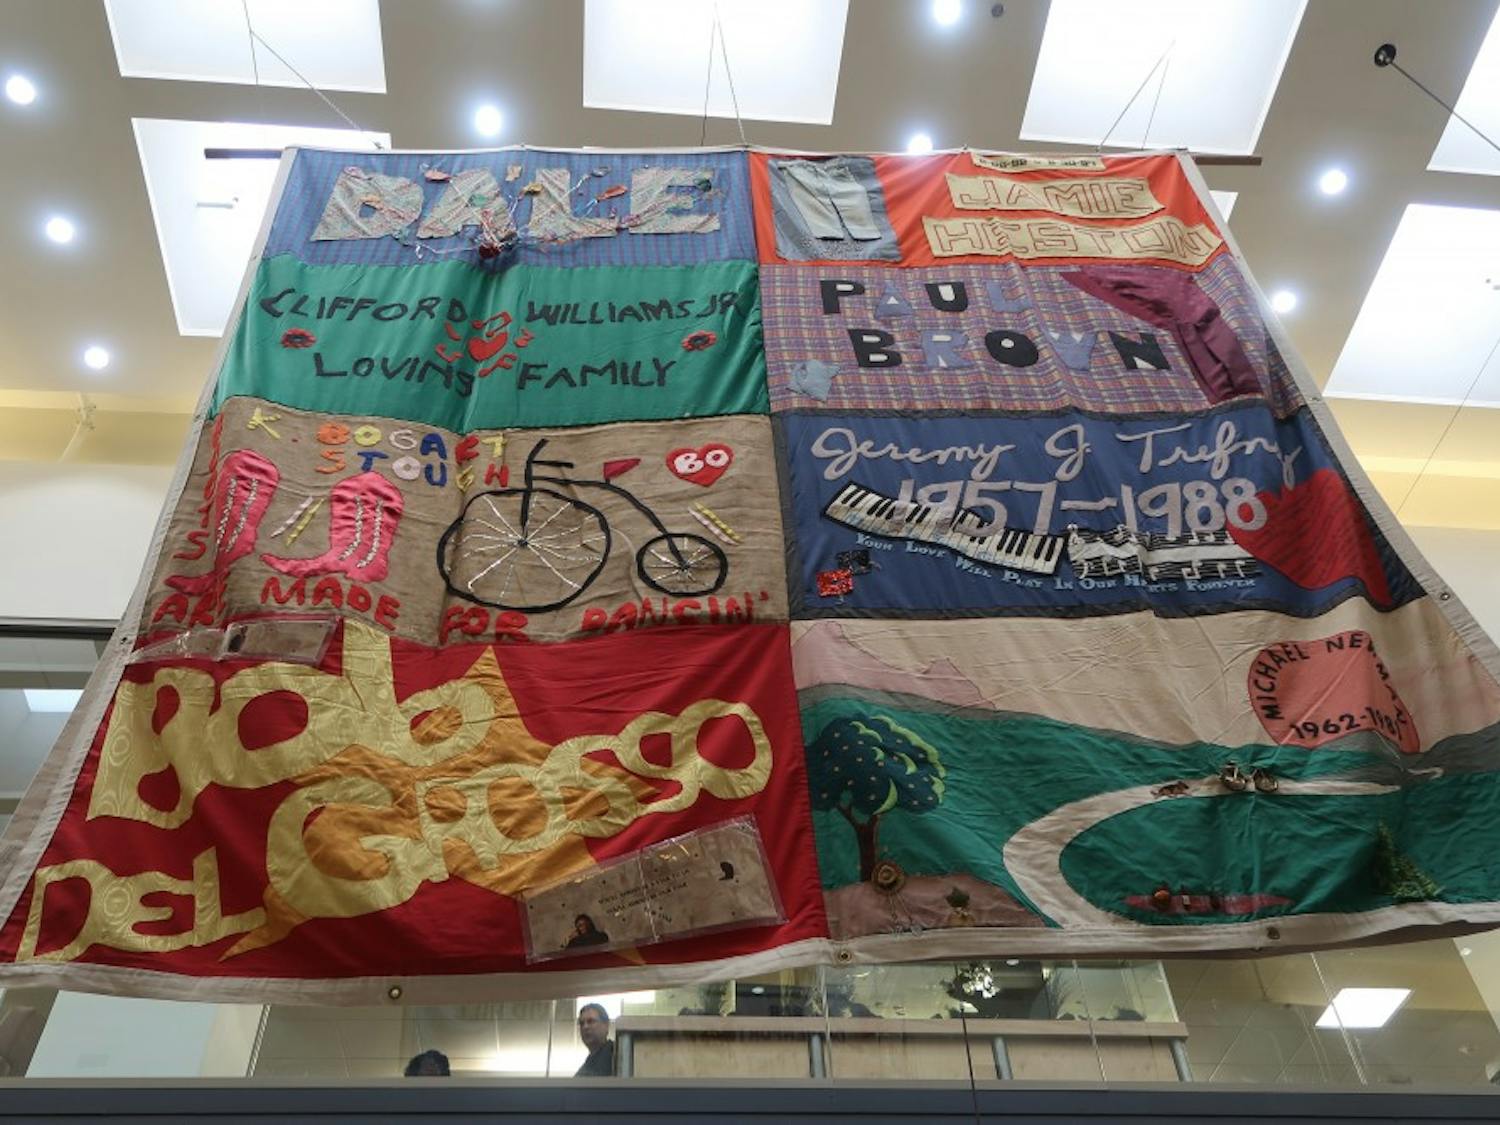 Jeremy Trefney's section of the AIDS Memorial Quilt was hanged in the Student Union on Friday afternoon. 